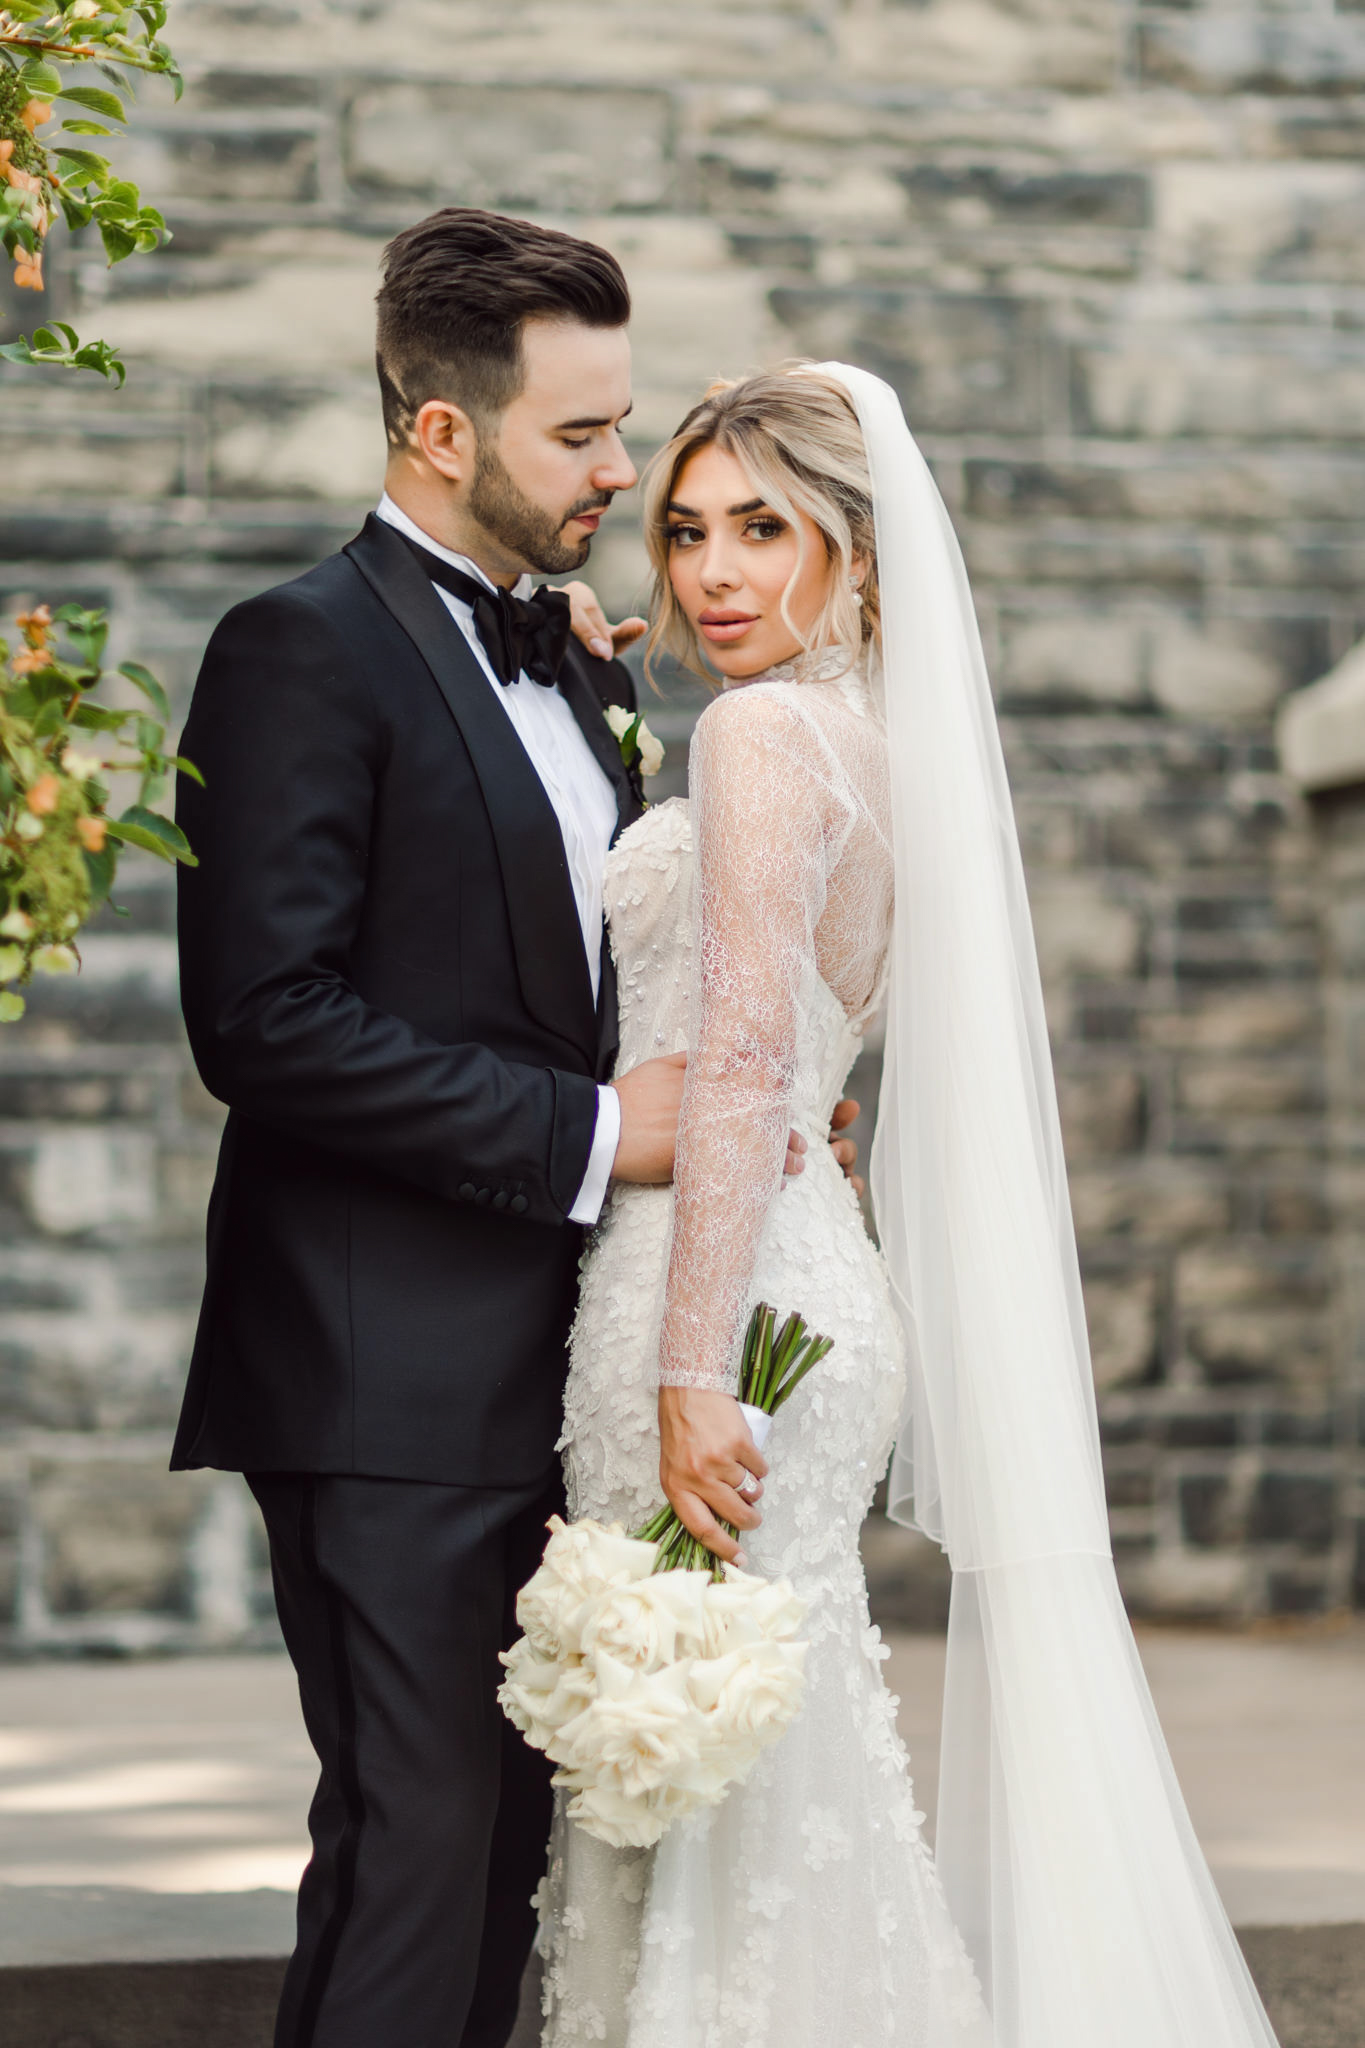 A Garden of 3000 White Roses at this Casa Loma Wedding